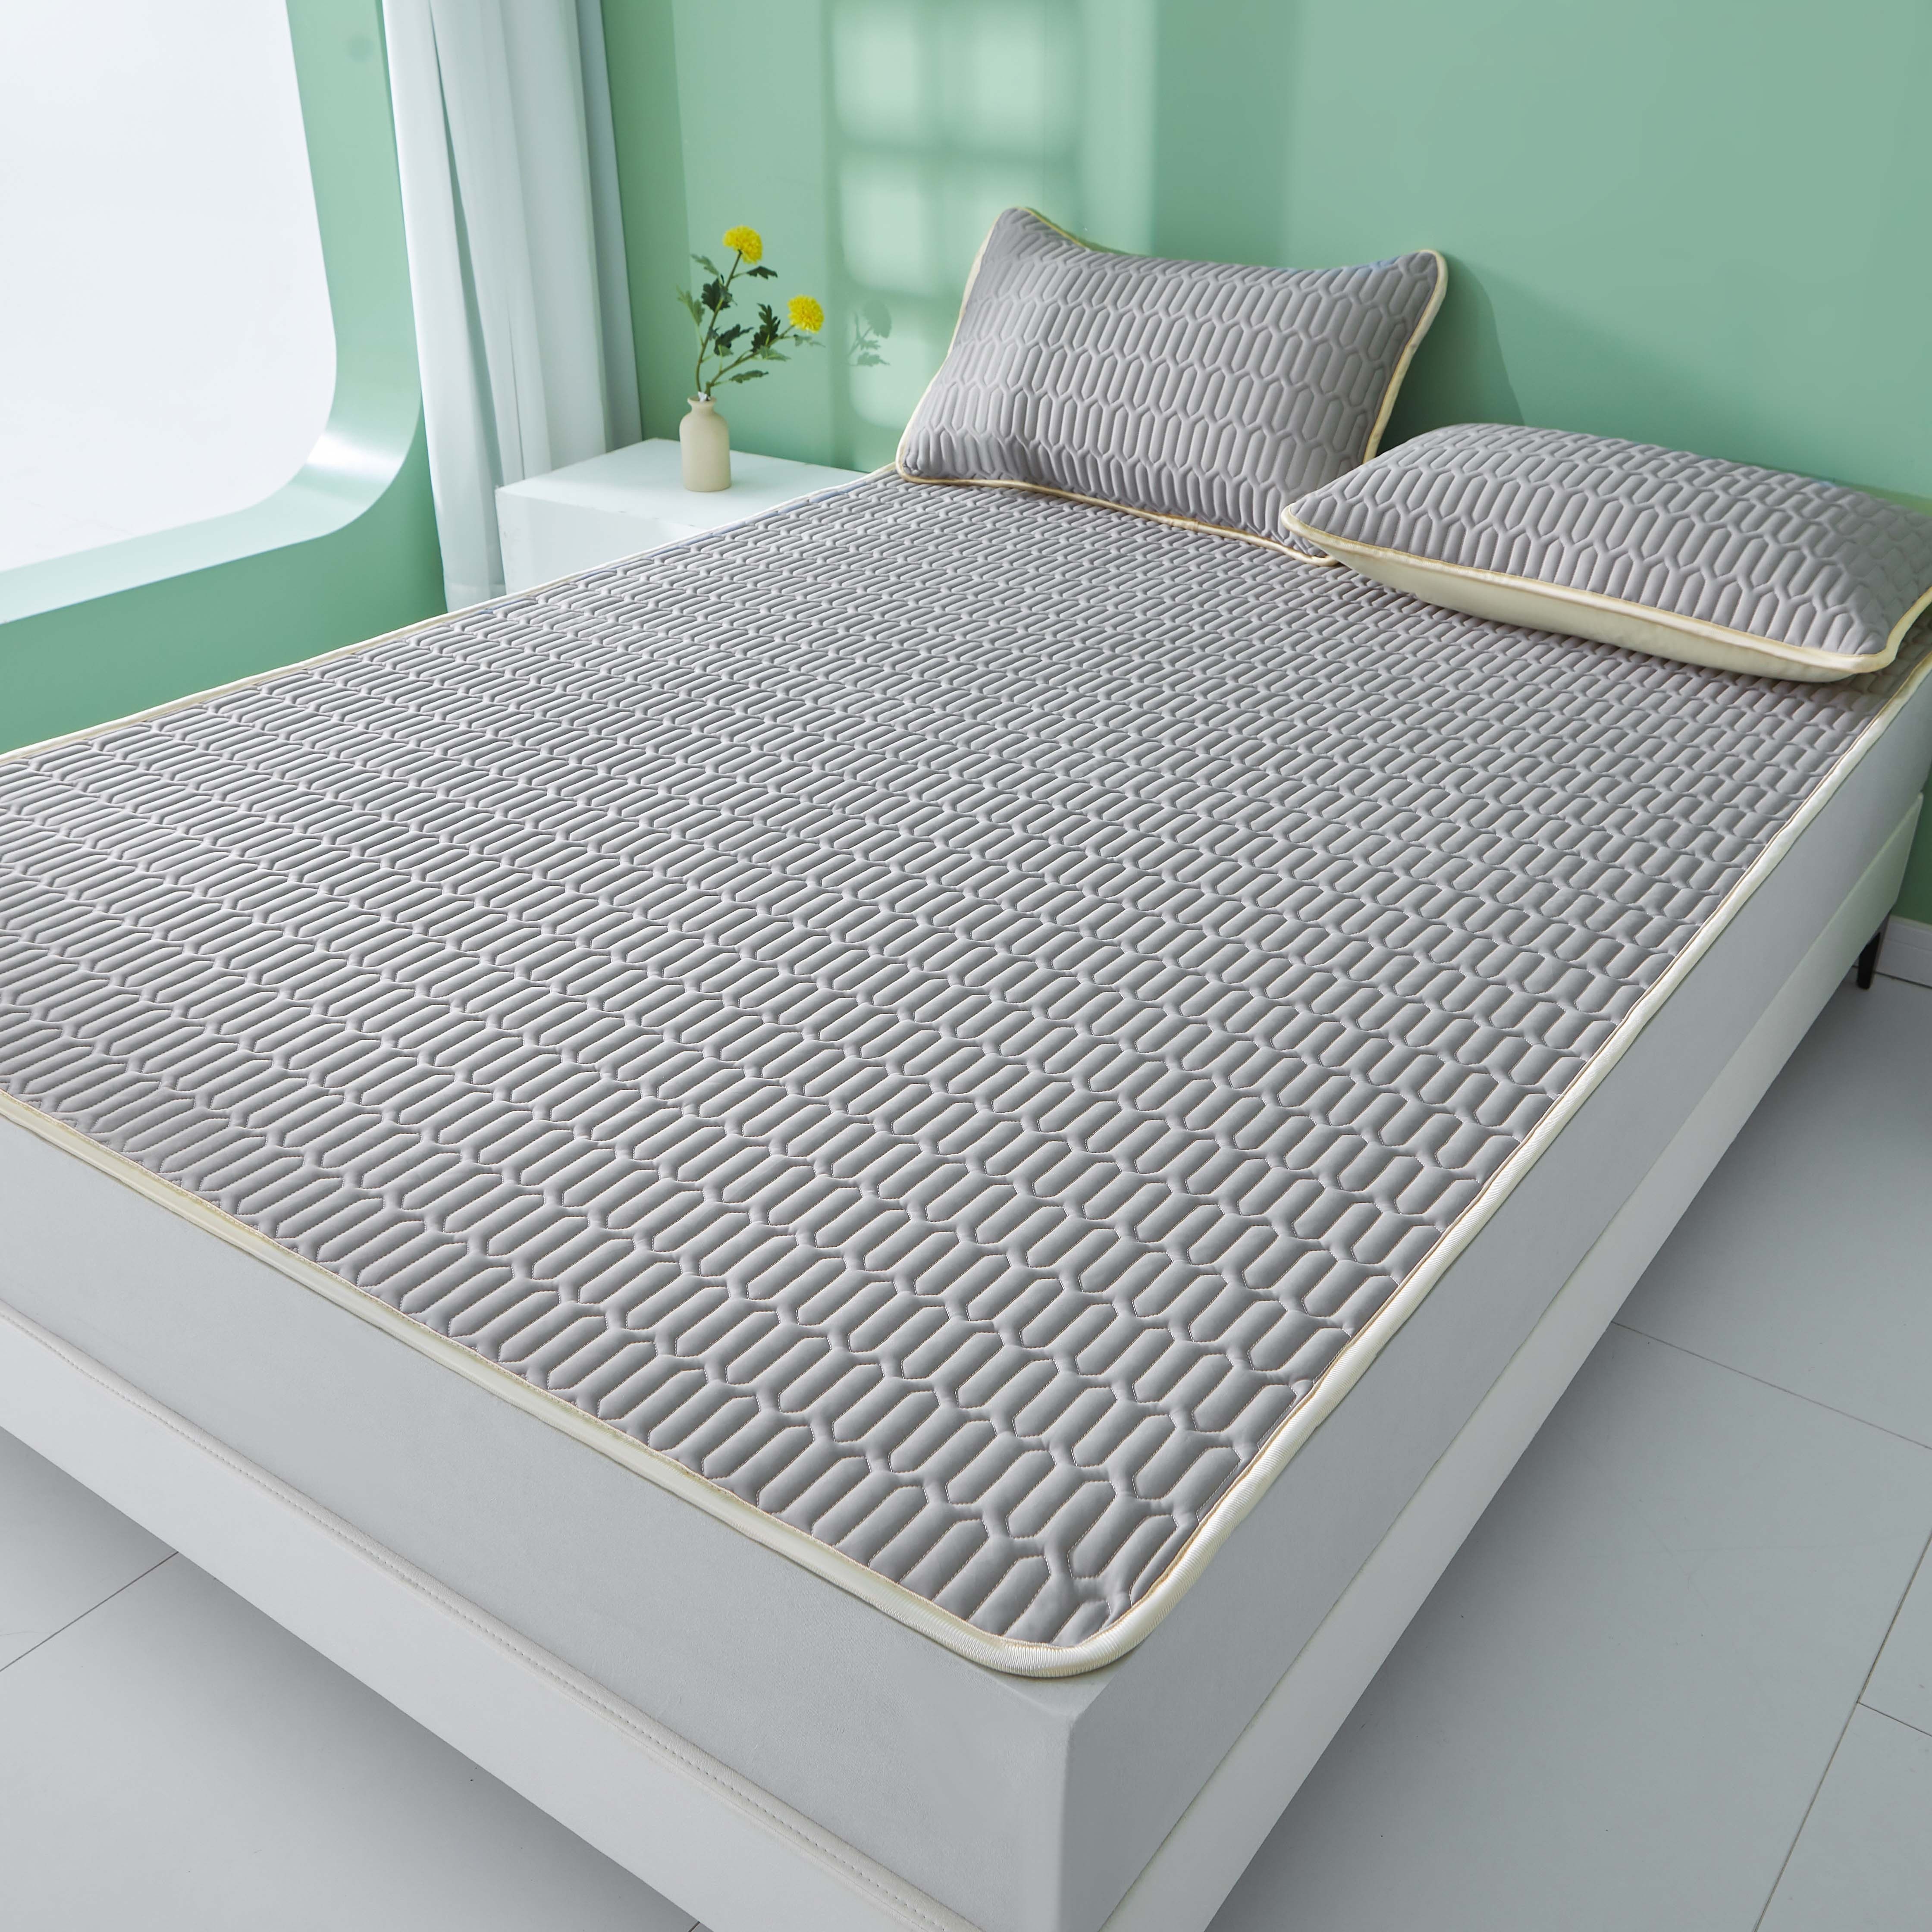 

Cooling Latex Mat - 1pc, Solid Color, Skin-friendly & Breathable, Machine Washable For Summer Comfort, Perfect For Bedroom Or Dorm Cooling Bed Mat